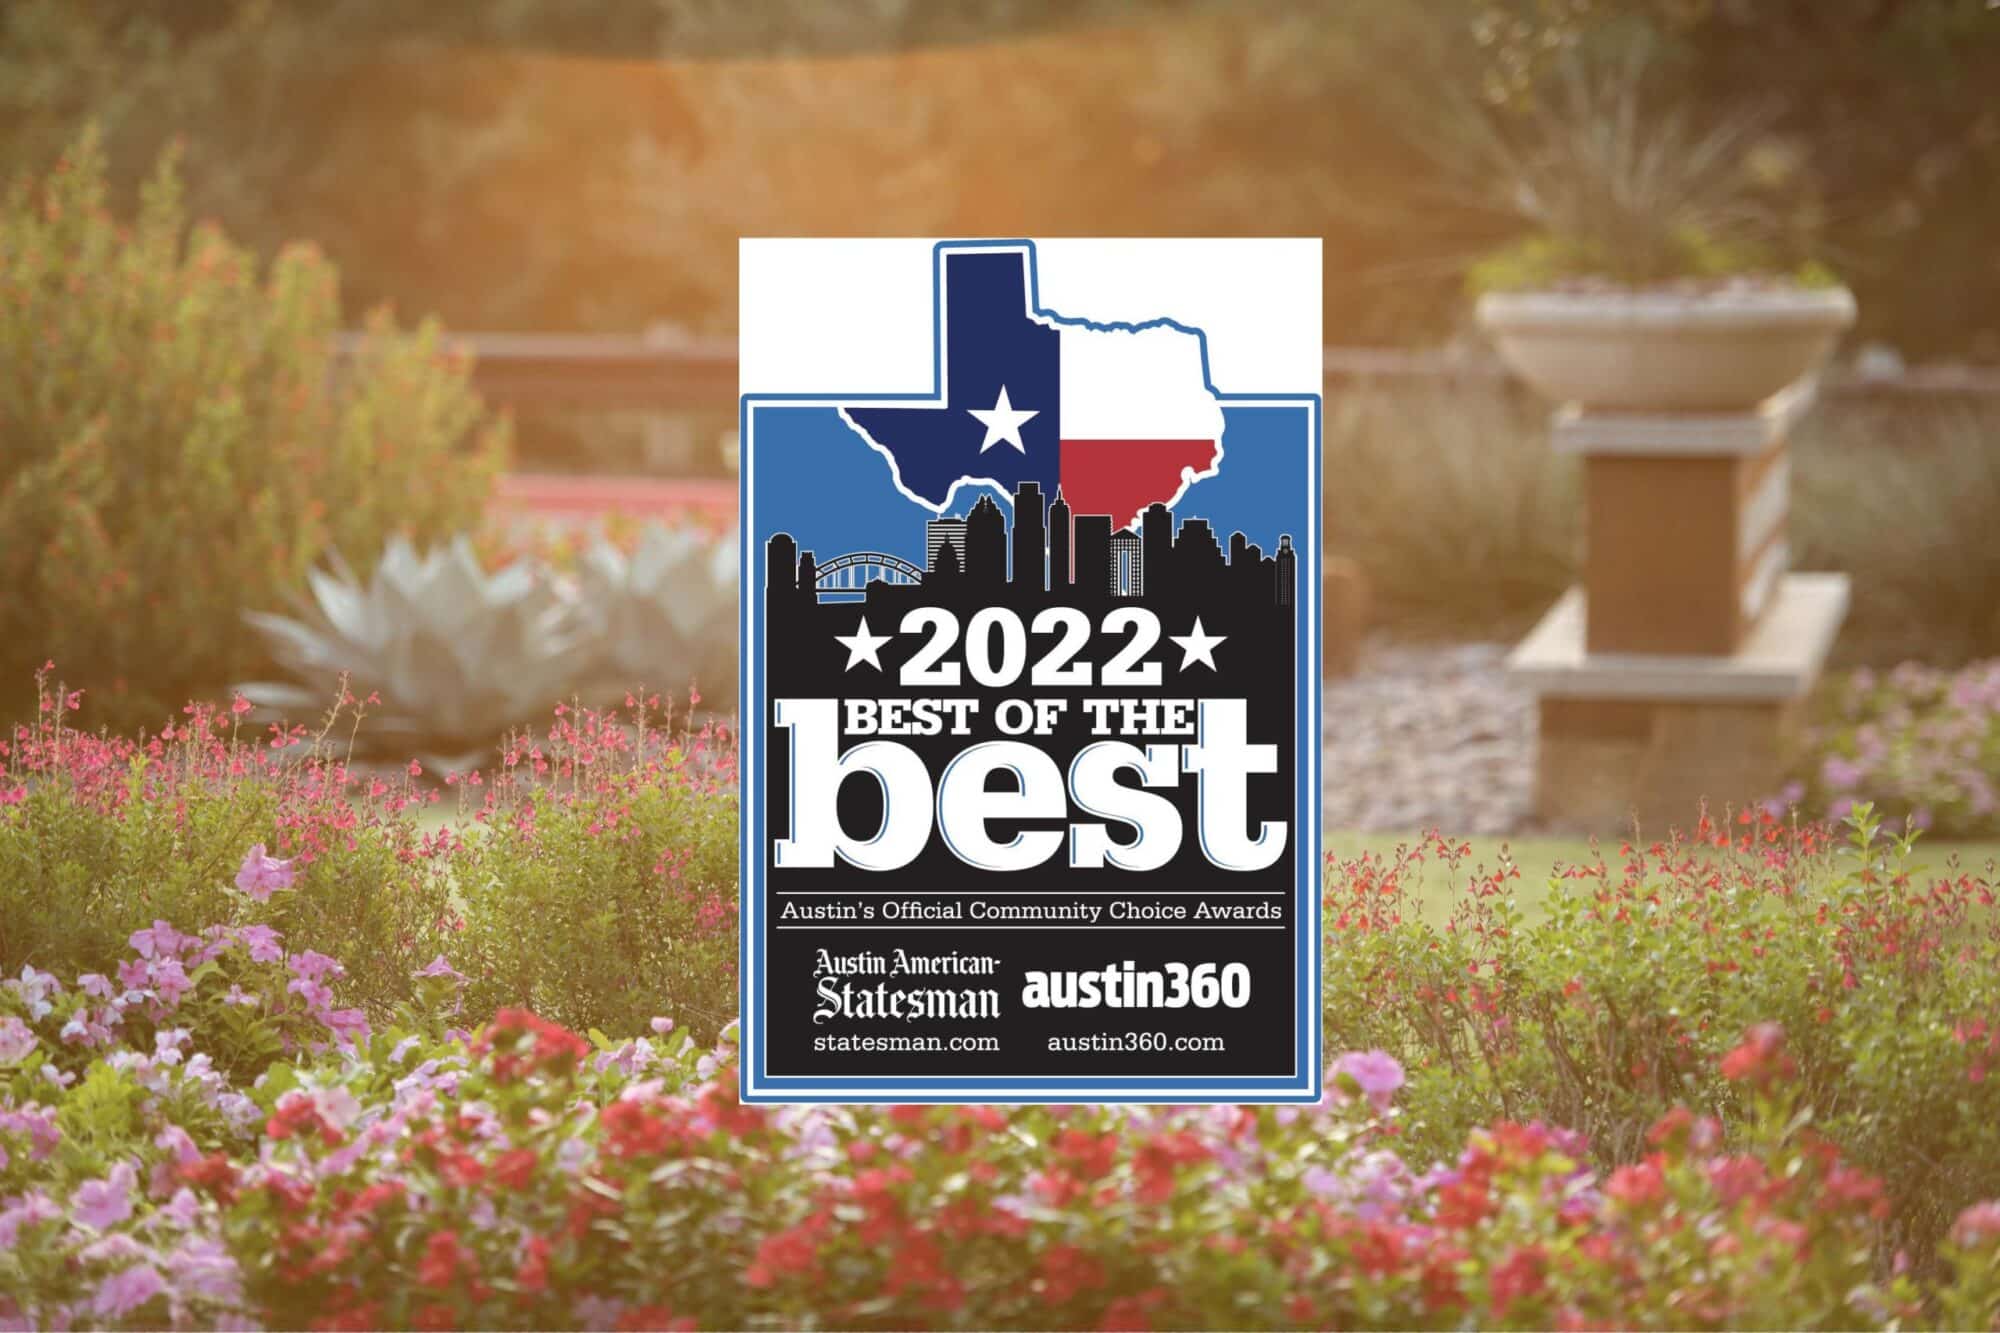 Longhorn Village ranks Best of the Best for Austin Official Community Choice Awards 2022